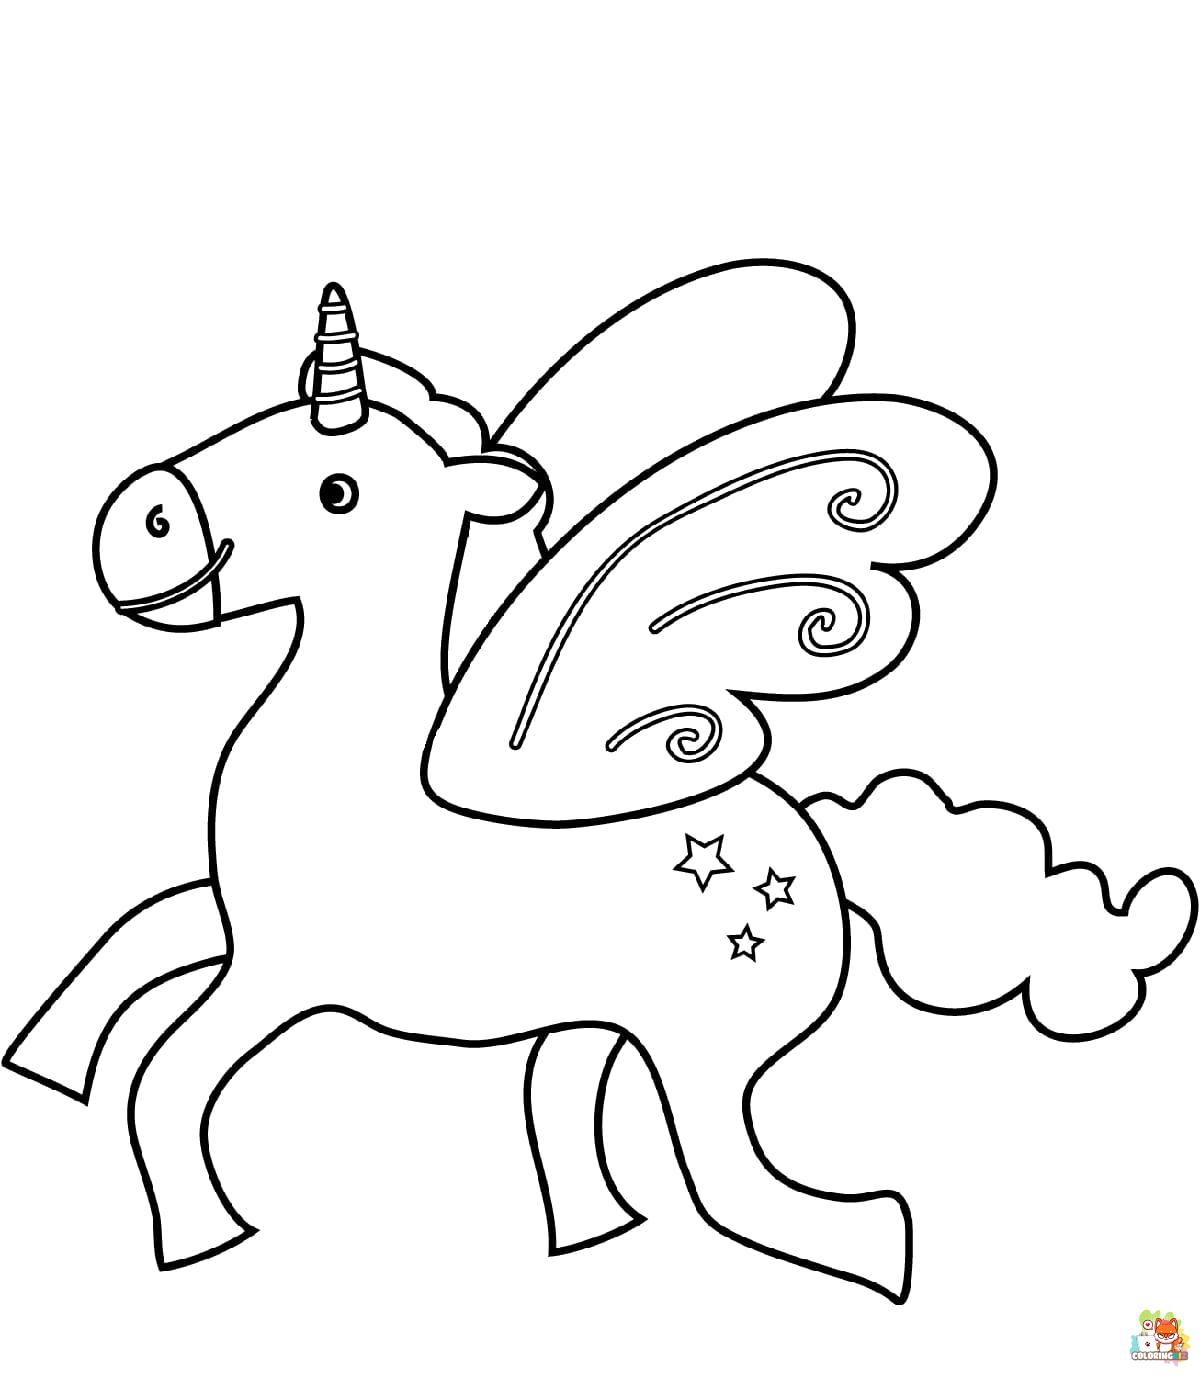 Winged Unicorn Coloring Pages 5